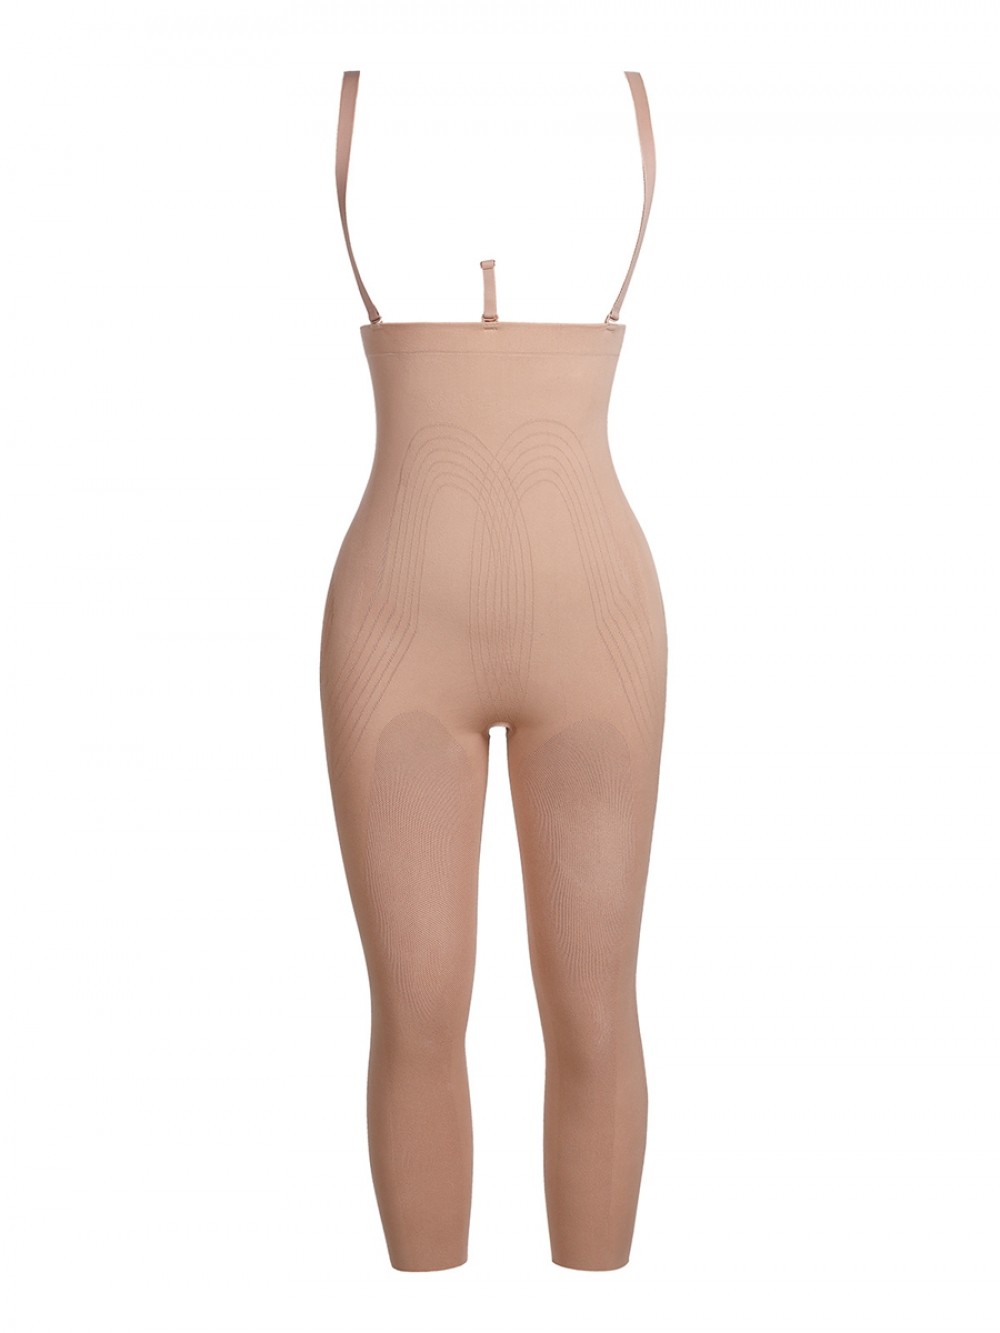 Nude Seamless Adjustable Straps Full Body Shaper Firm Control